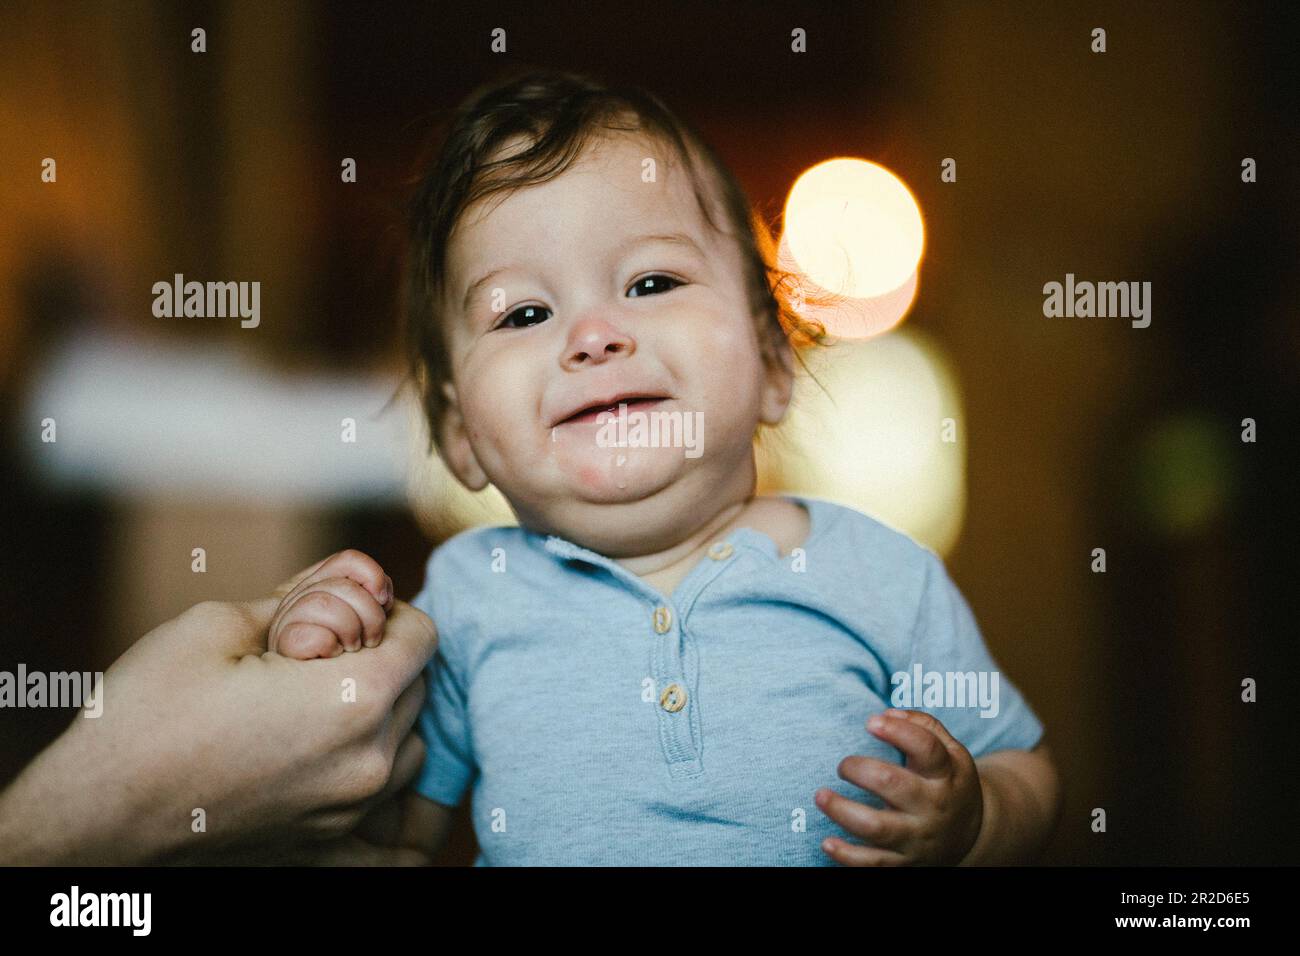 Cute chubby baby smiles and stands with help from parent Stock Photo